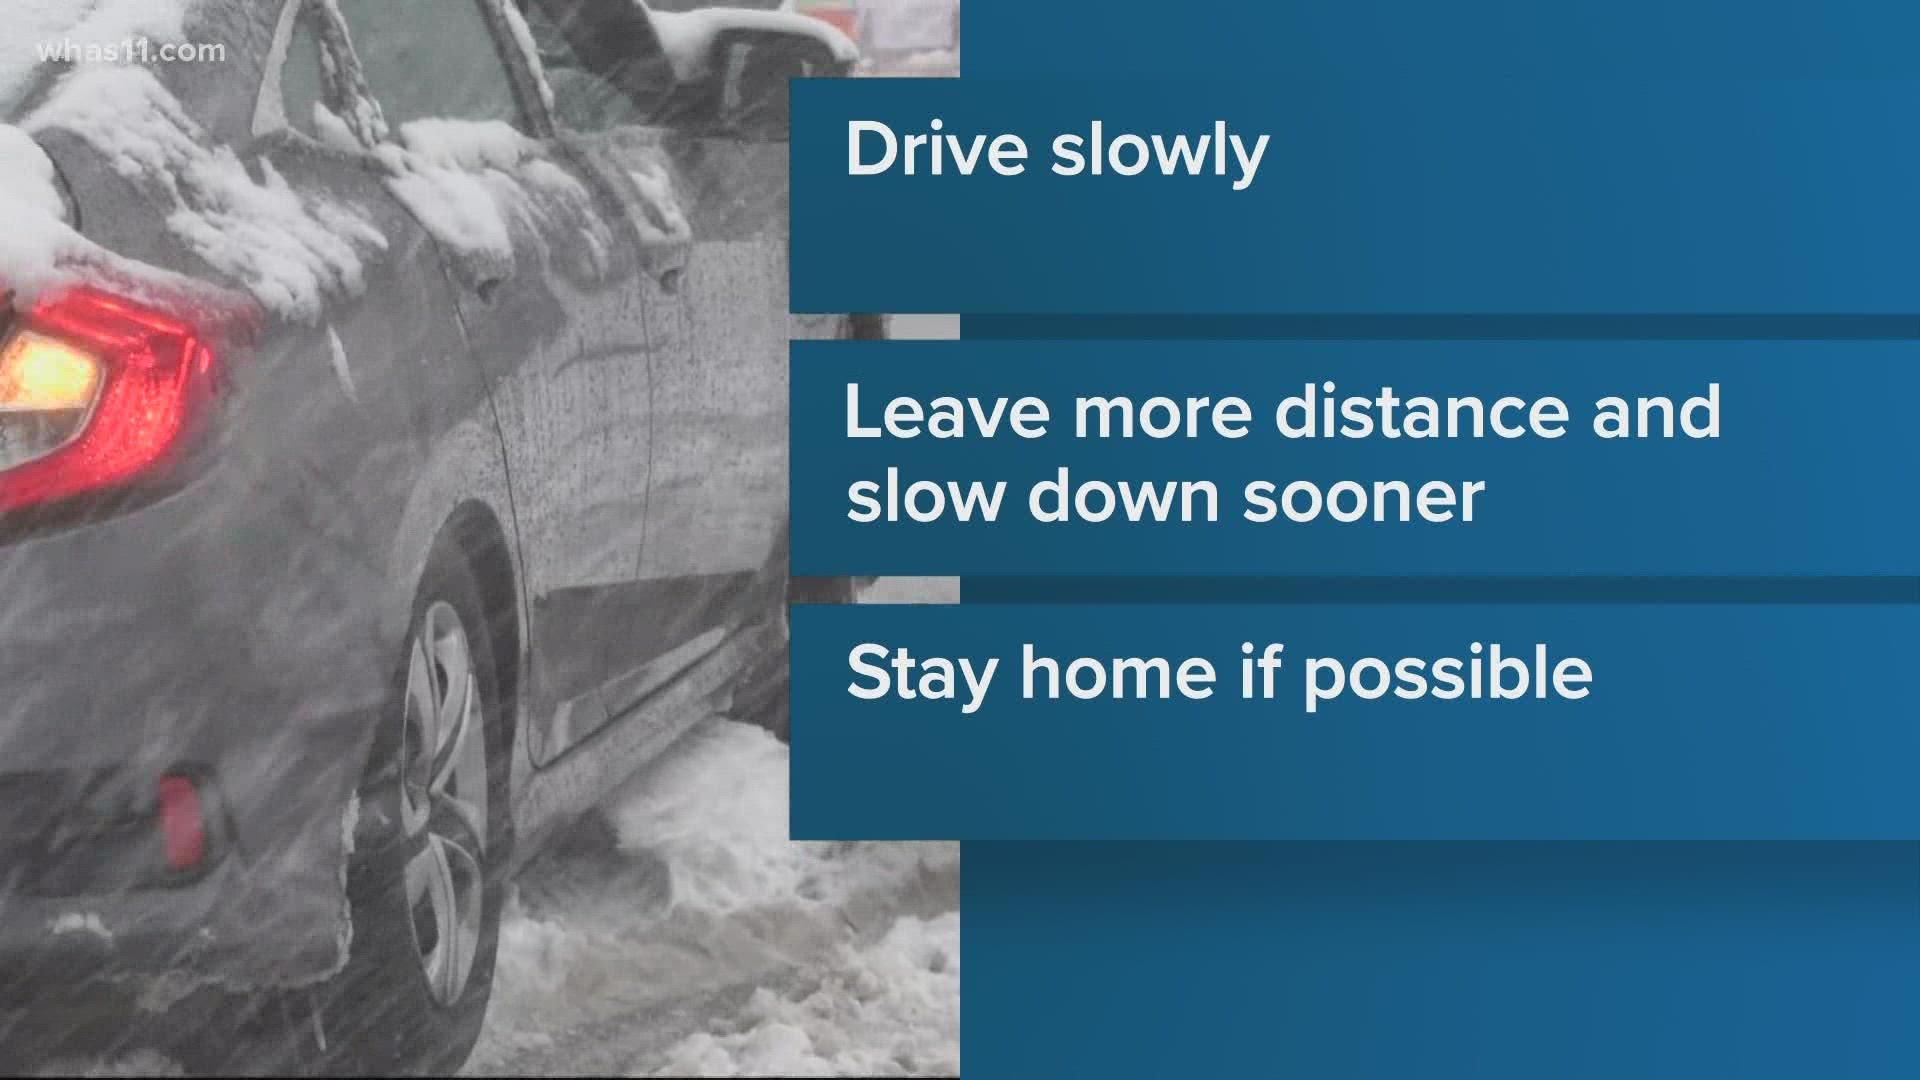 Snow is in the forecast on Thursday so here's how to best prepare to stay safe on the roads.